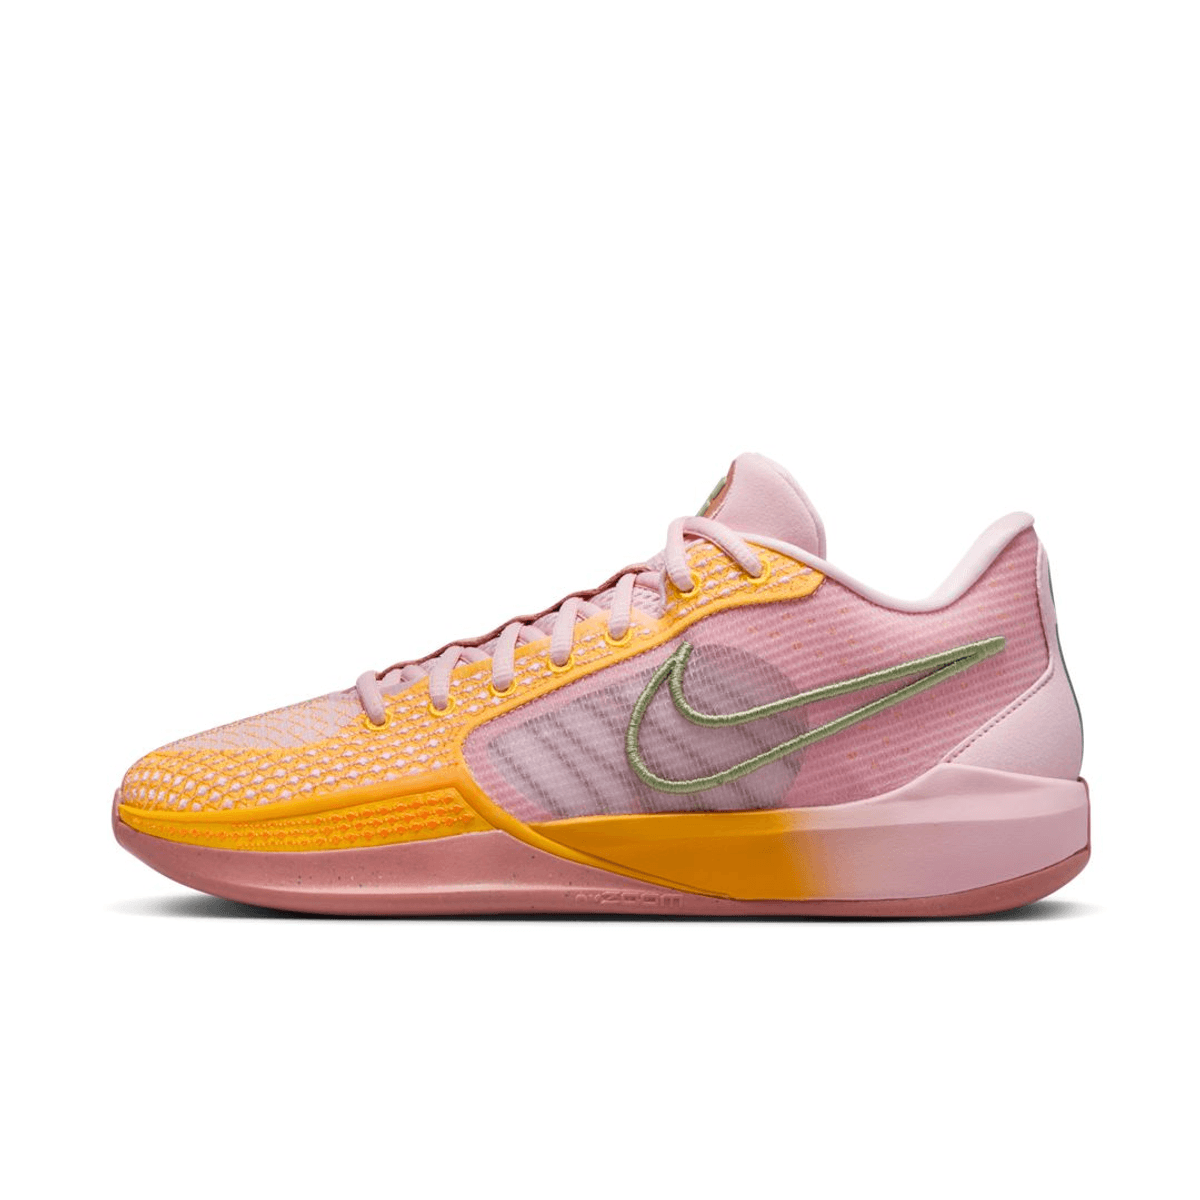 The Nike Sabrina 1 “Medium Soft Pink” Releases December 6th